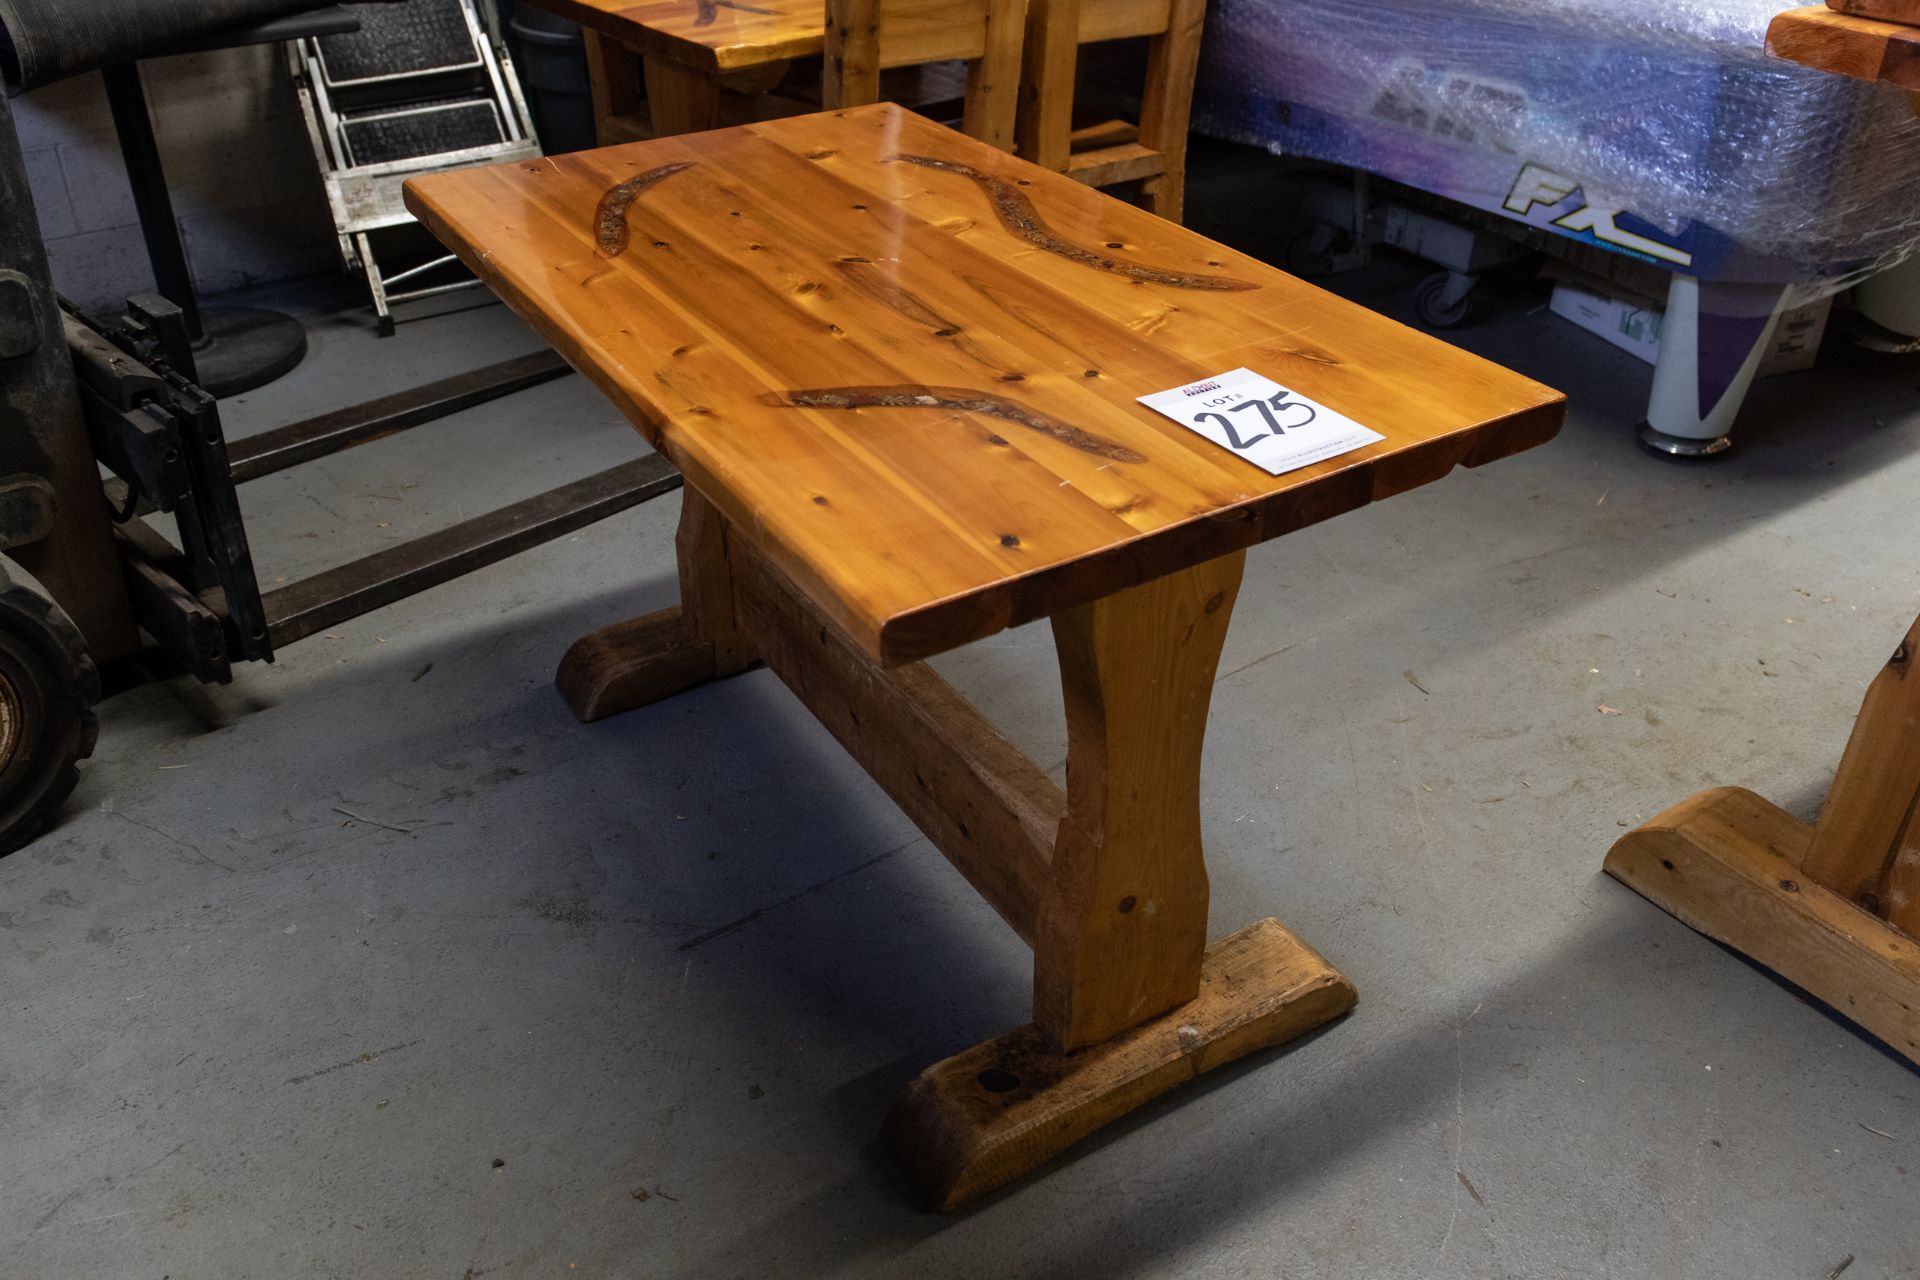 4' WHITE PINE DINING TABLE L-48" W-28" H-30"